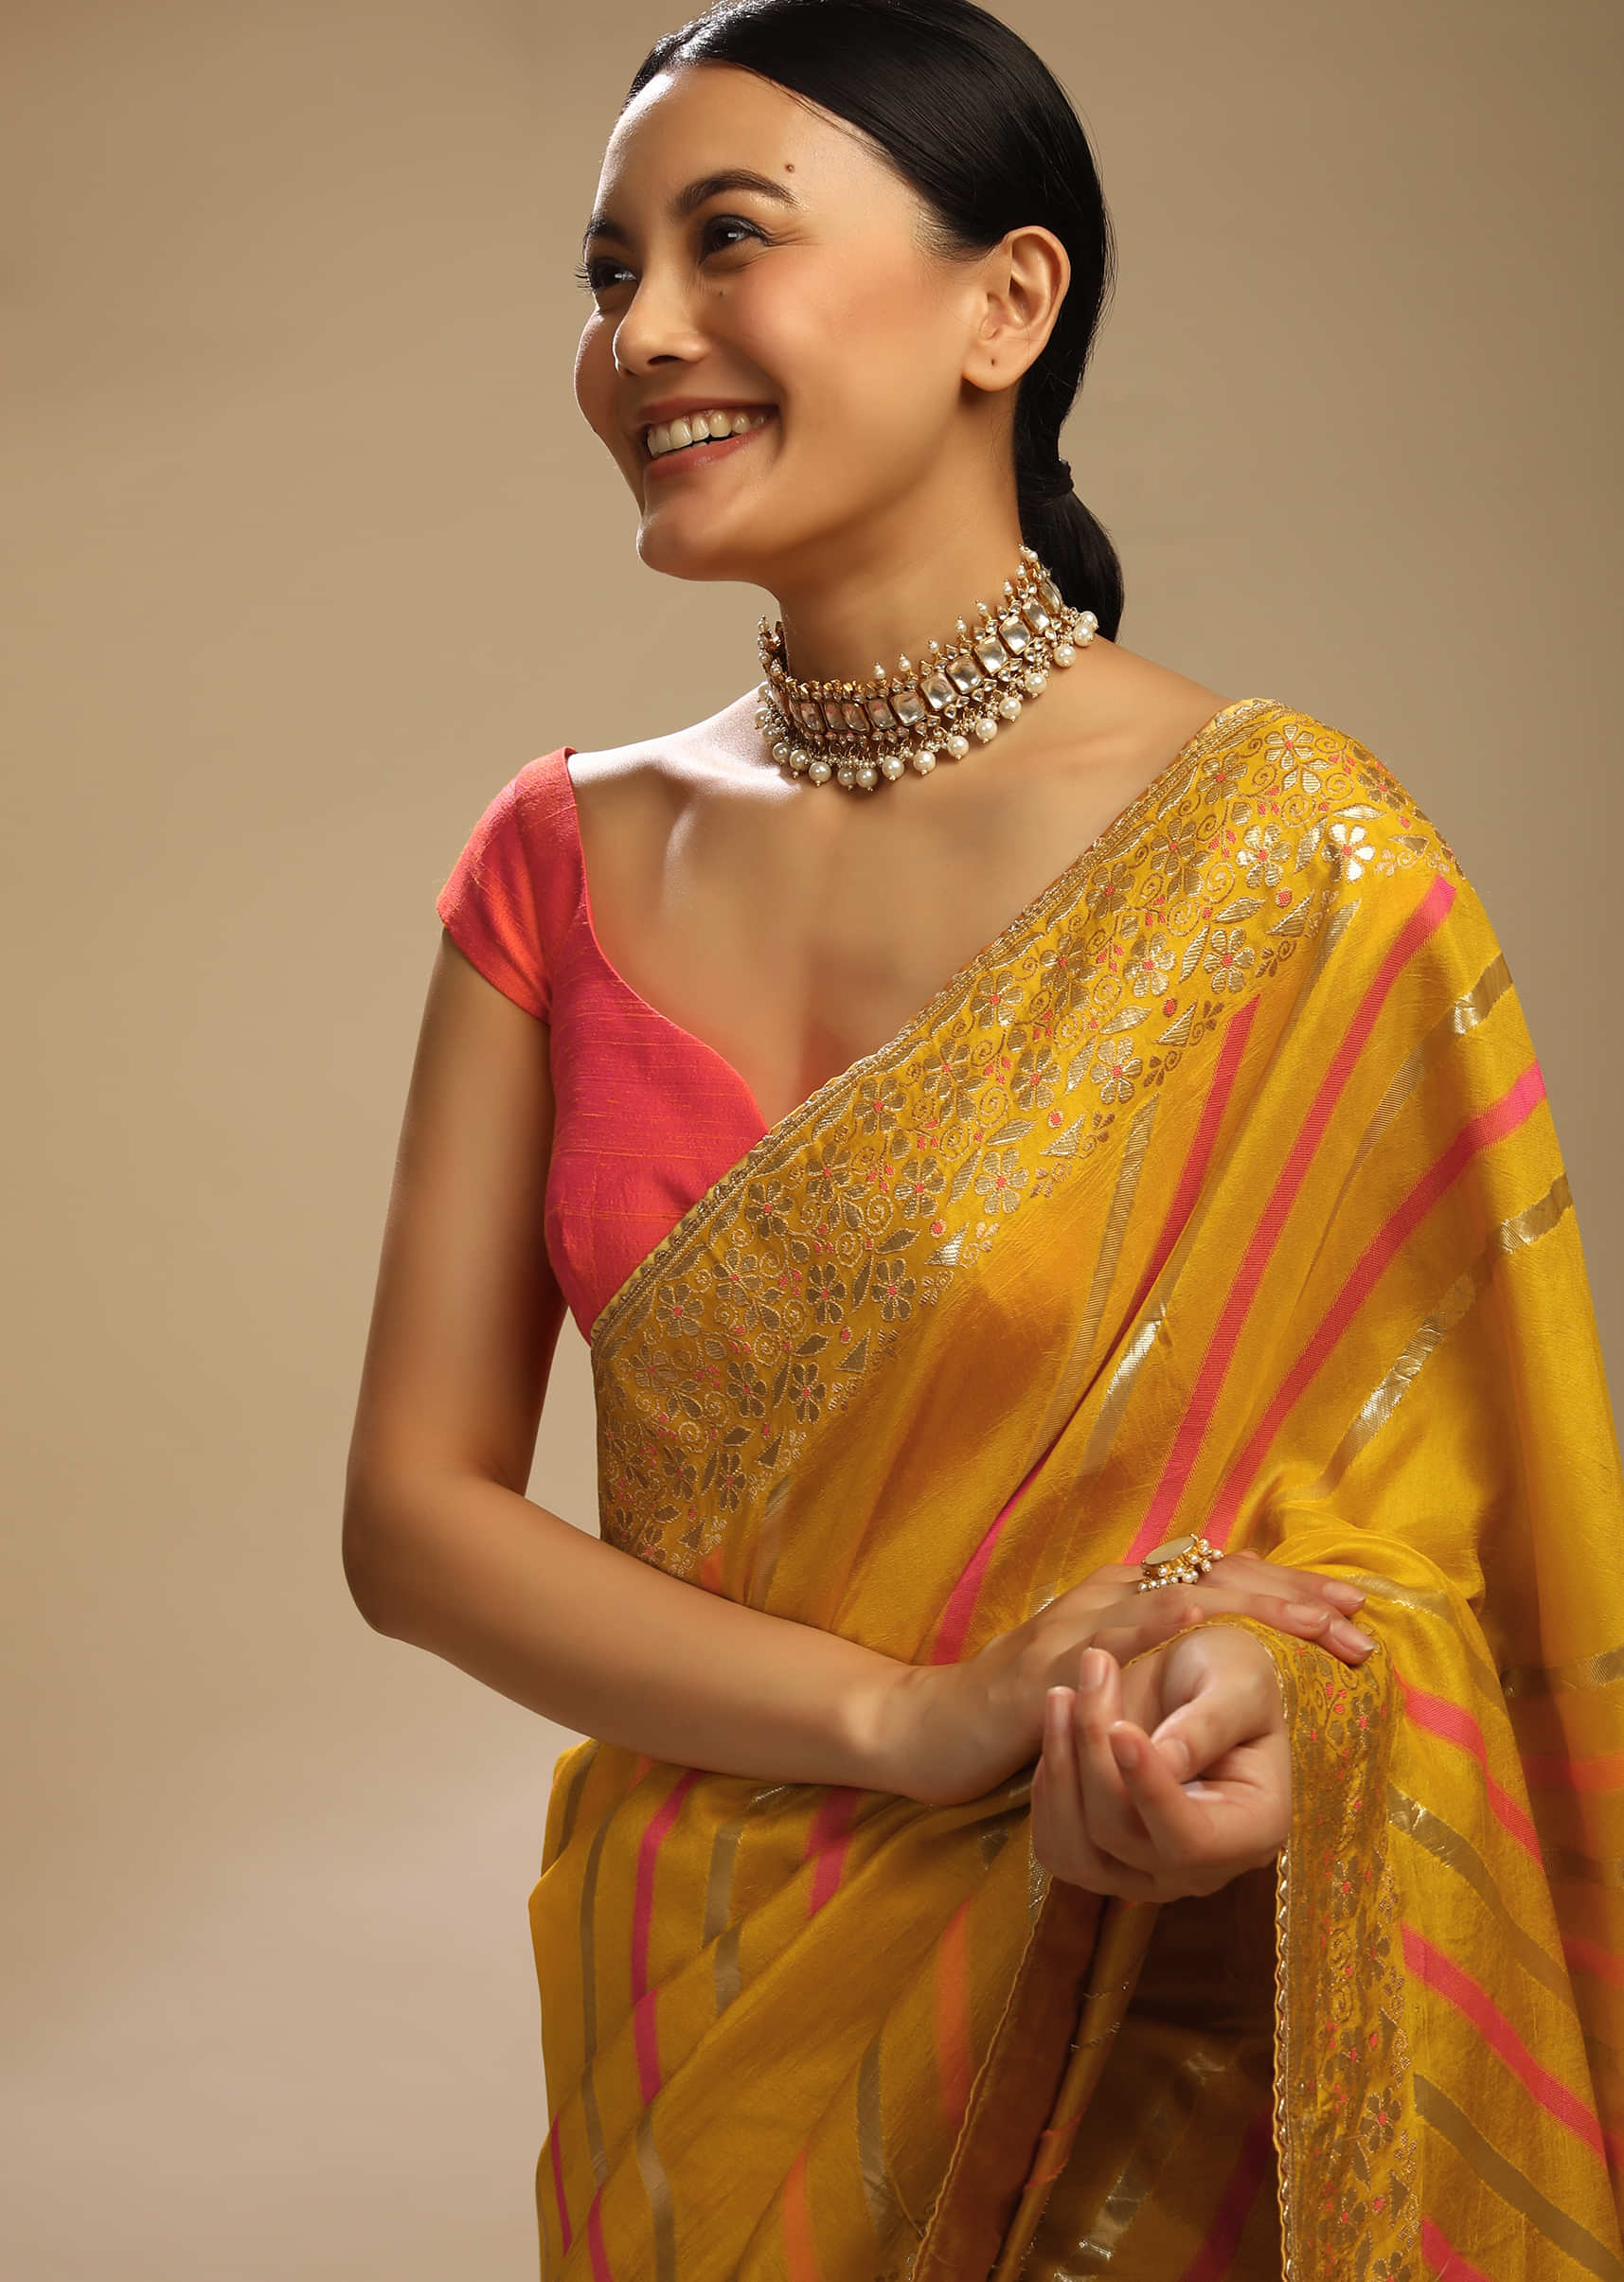 Mustard Saree In Dola Silk With Multi Colored Woven Diagonal Stripes And Floral Border